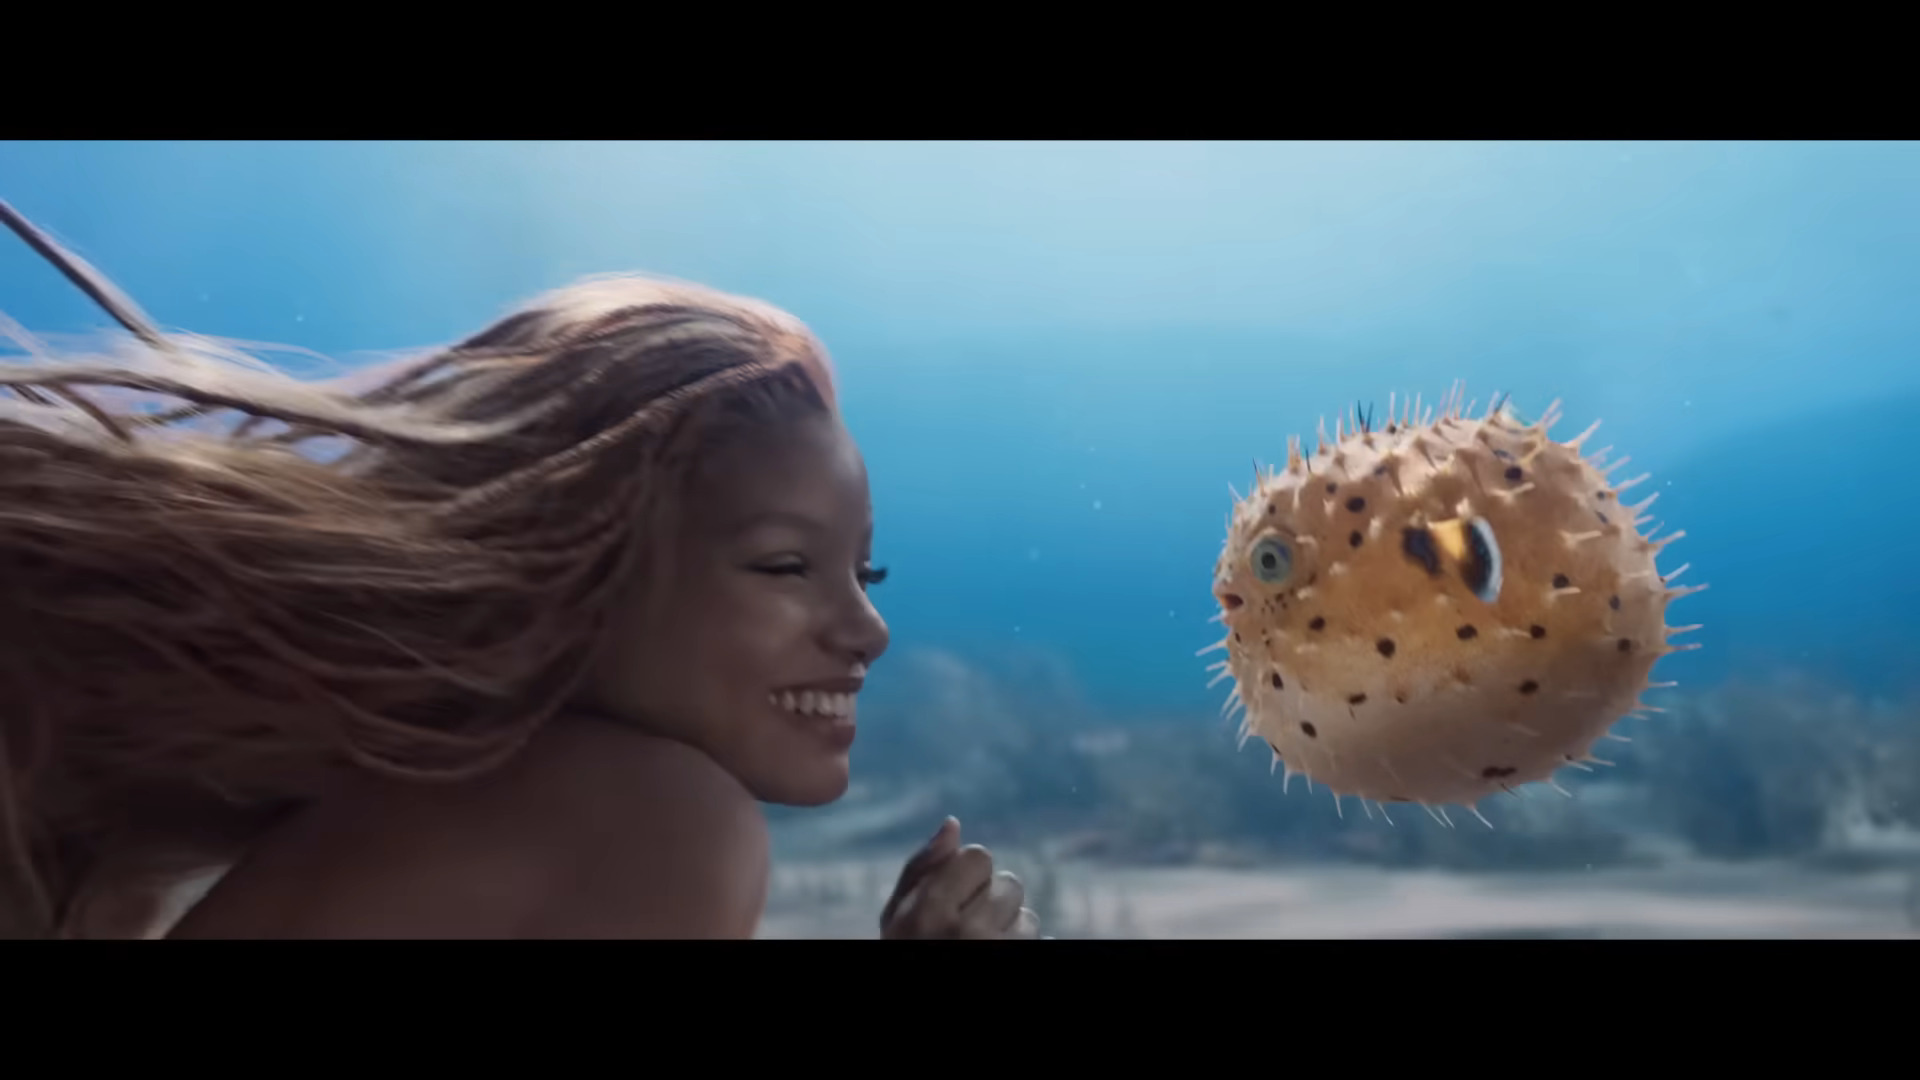 Ariel (Halle Bailey) plays with a puffer fish in The Little Mermaid (2023), Disney